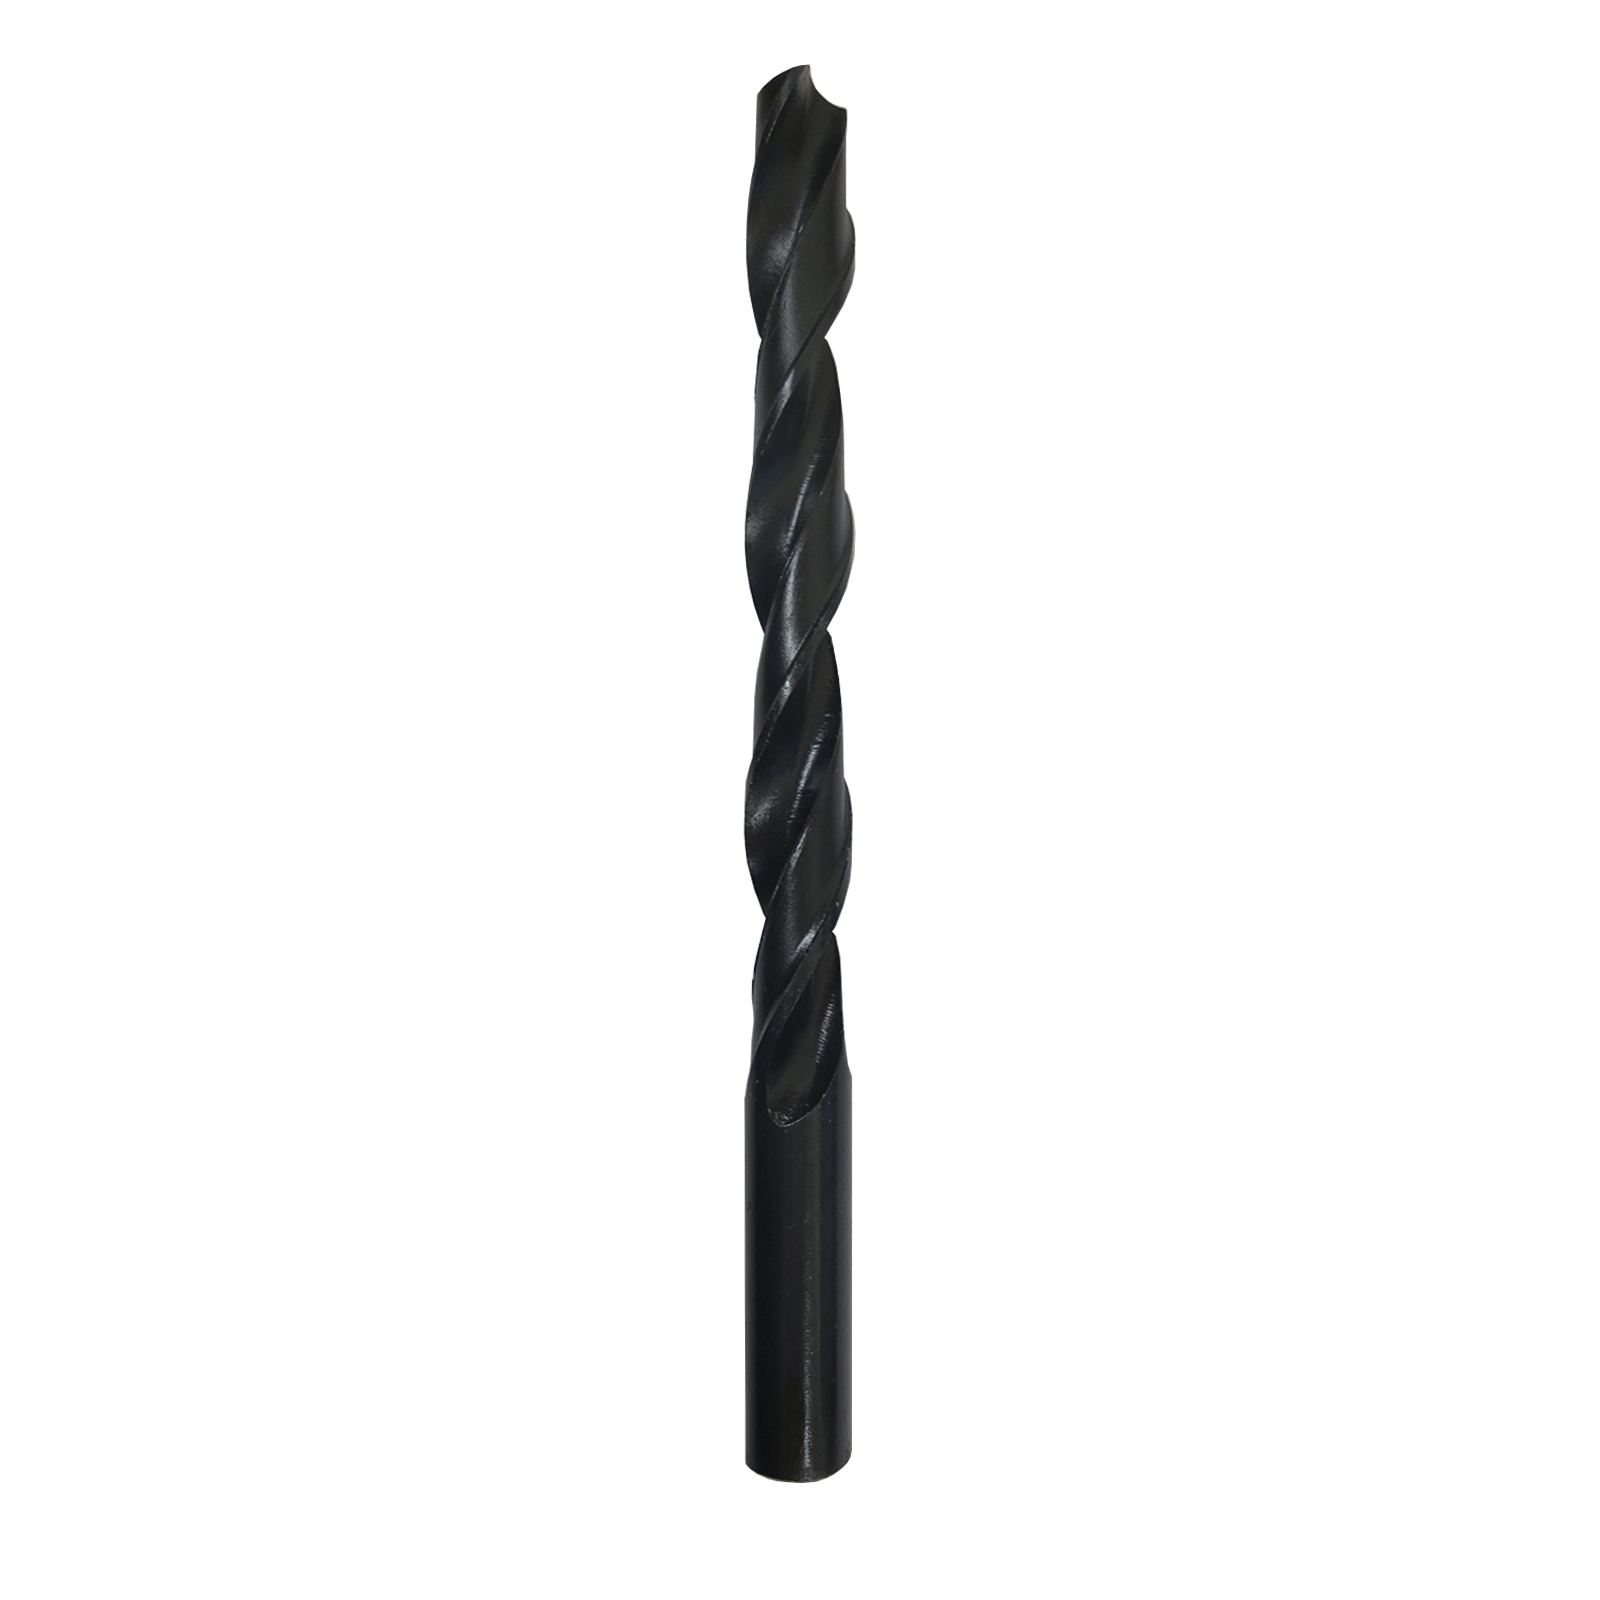 Gyros 45-42066 Premium (Made in US) Industrial Grade HSS Black Oxide Metric Drill Bit, 4.8 mm, Pack of 12